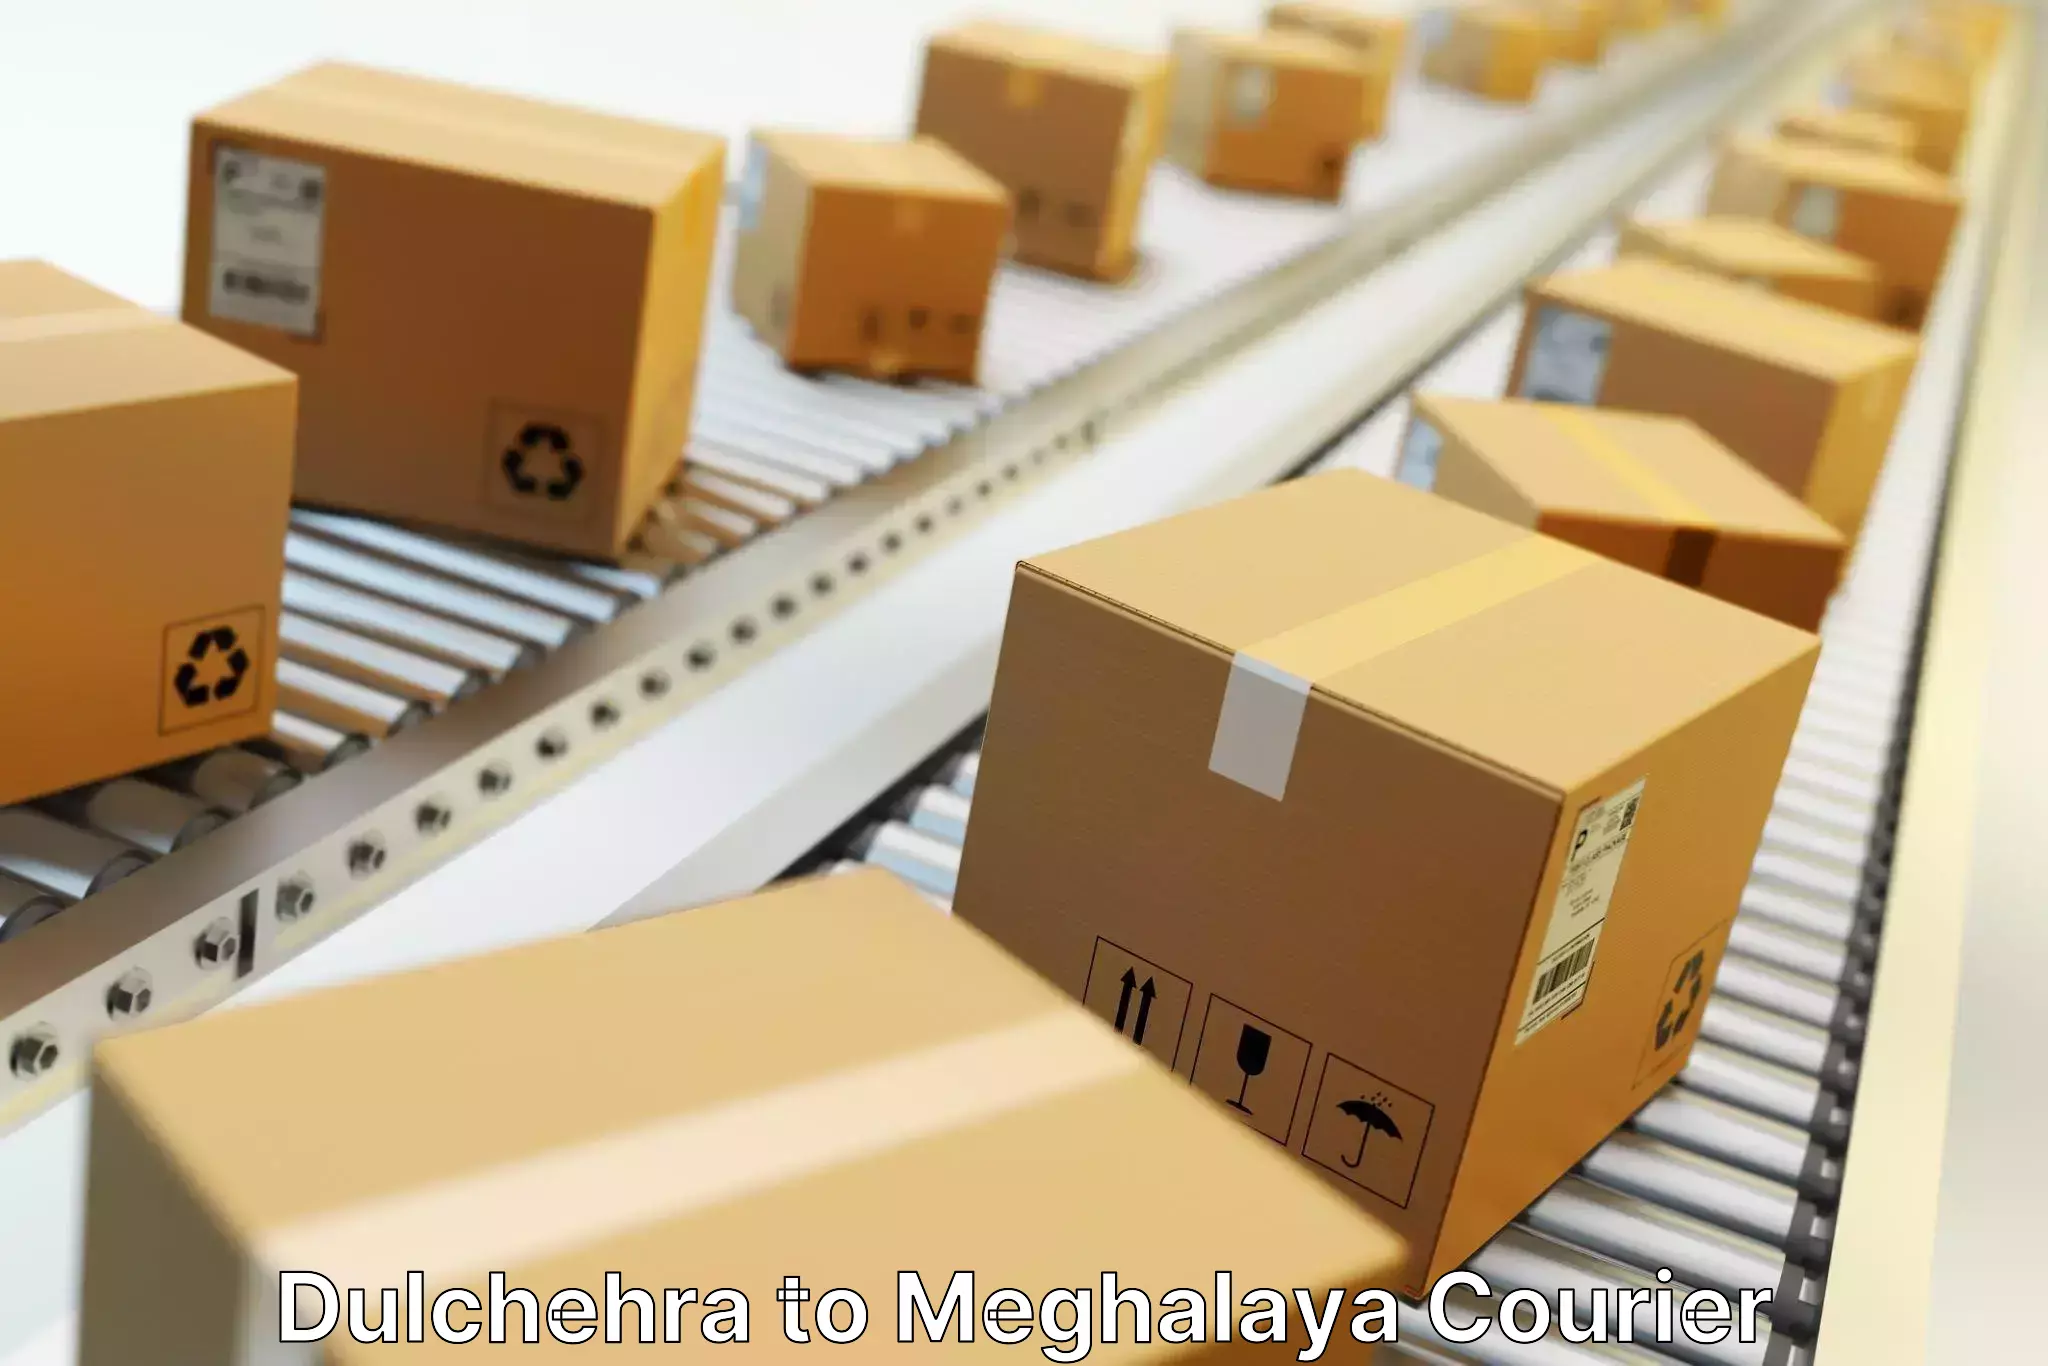 Tailored freight services Dulchehra to Meghalaya